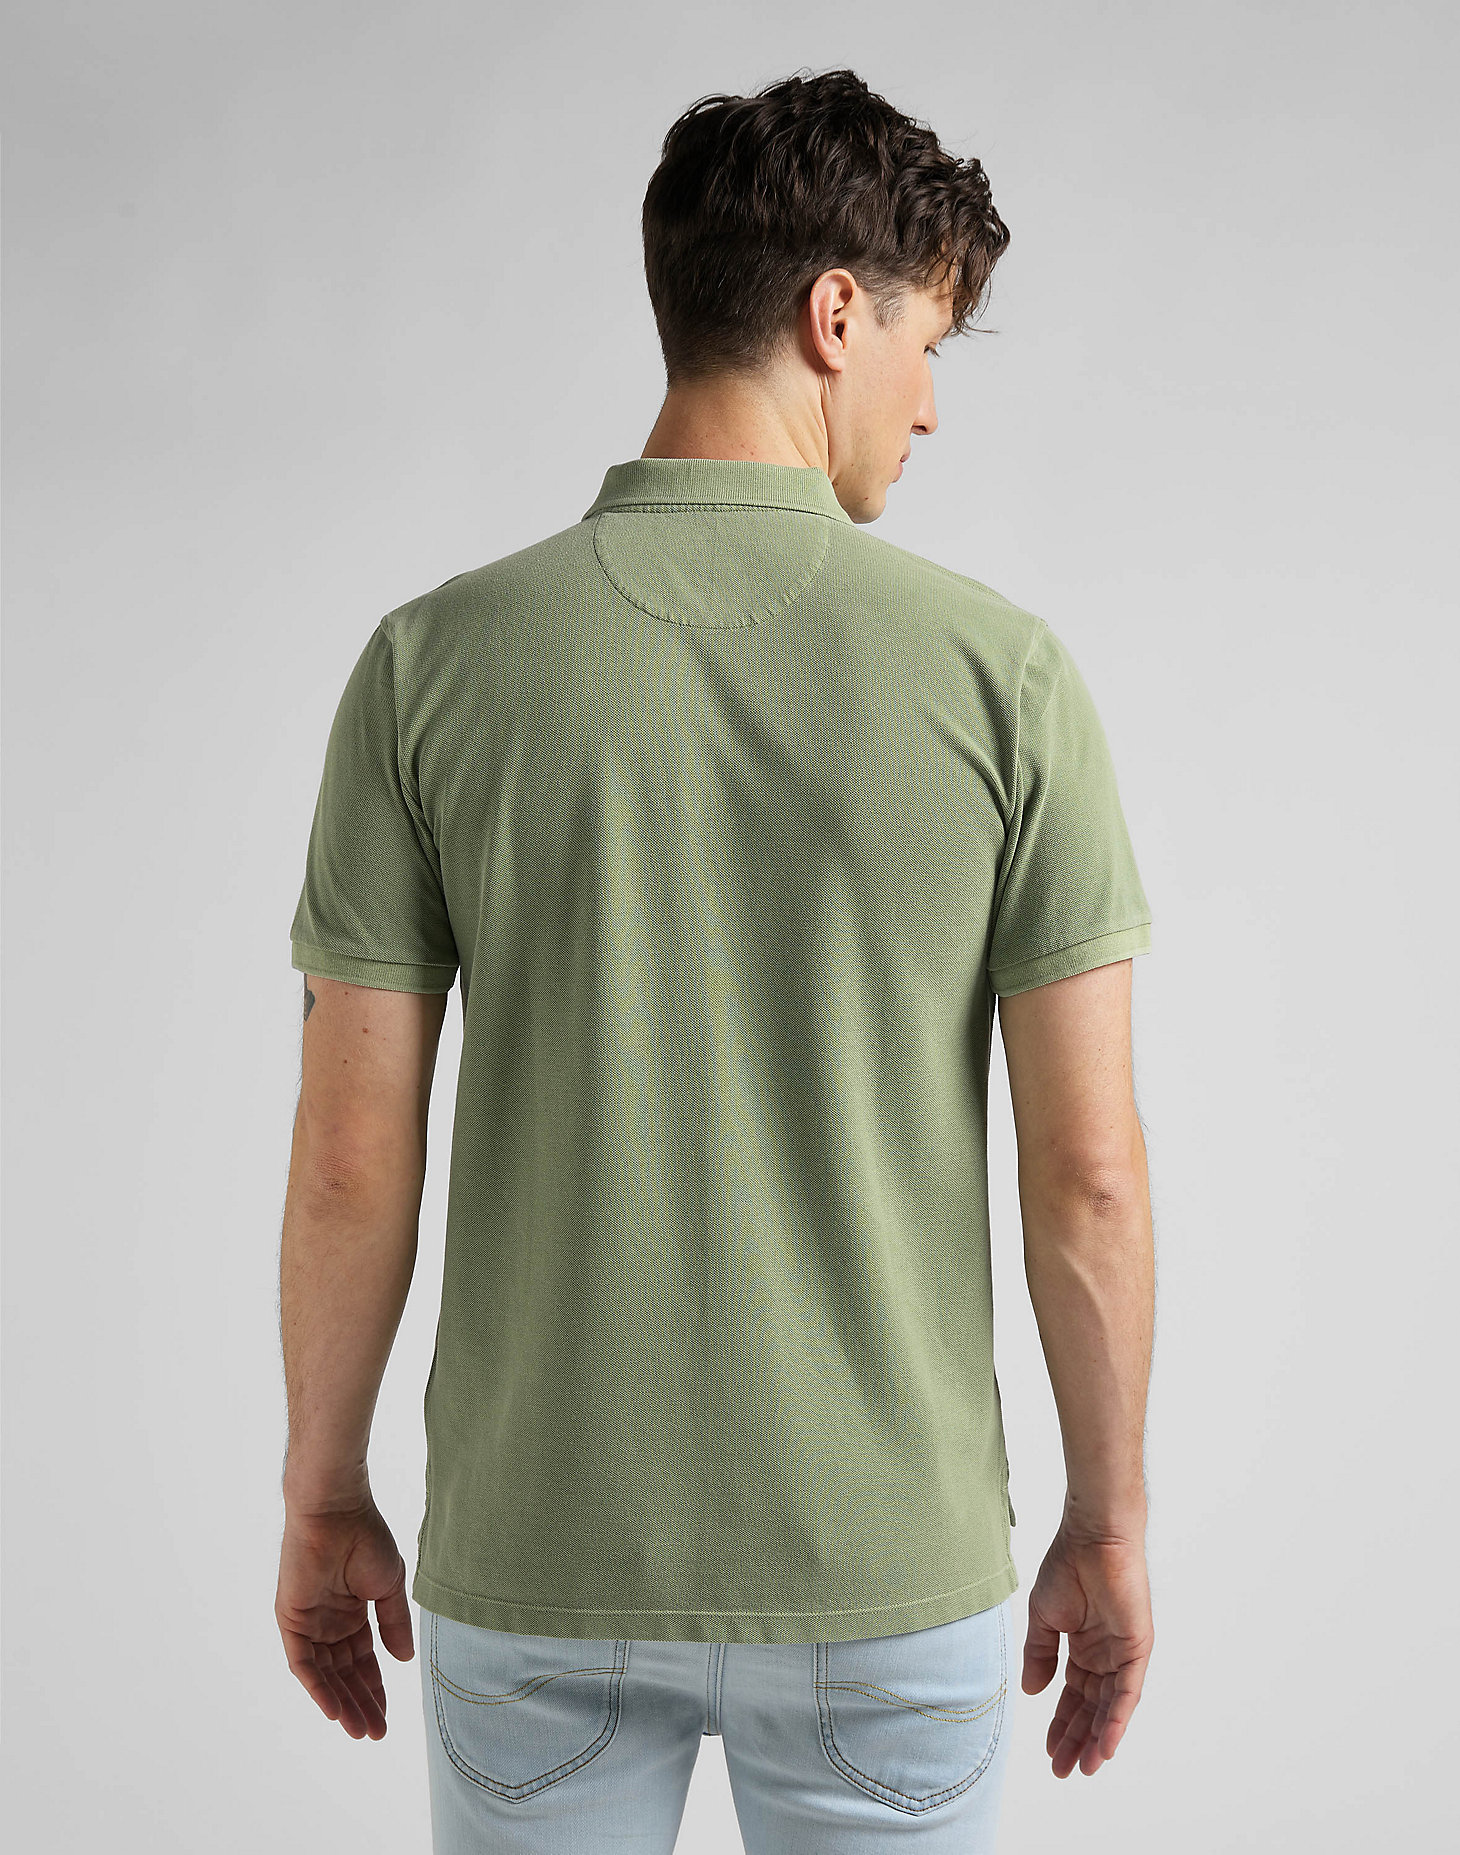 Natural Dye Polo in Brindle Green alternative view 1